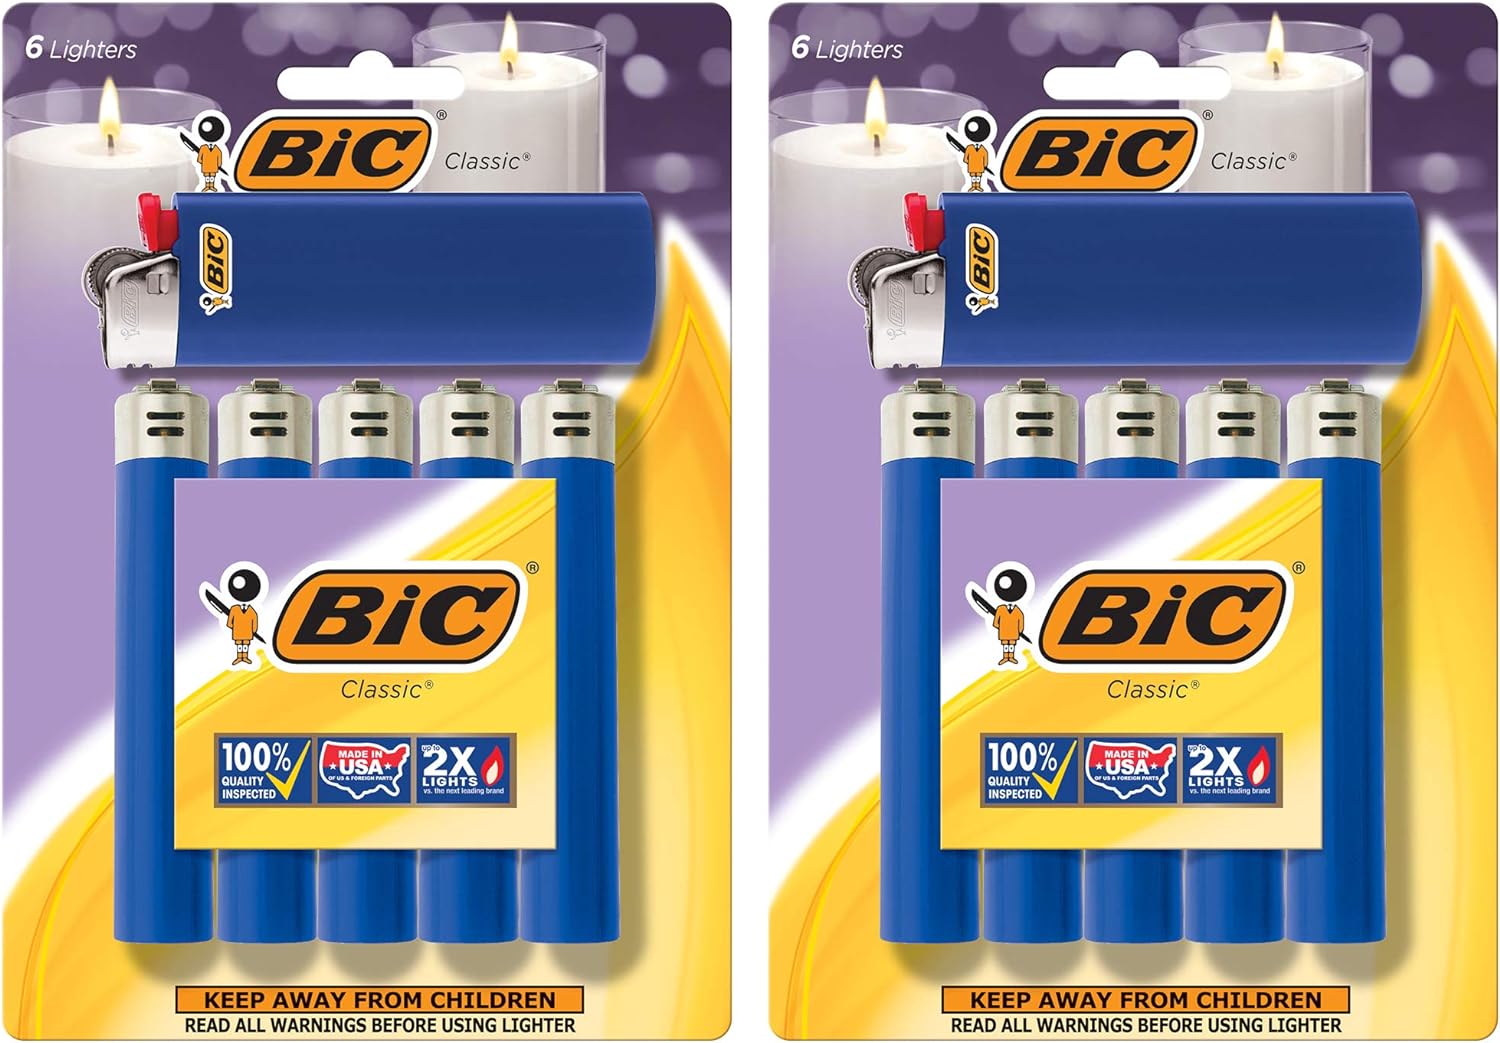 BIC Classic Lighter, Blue, 12-Pack (Packaging May Vary)